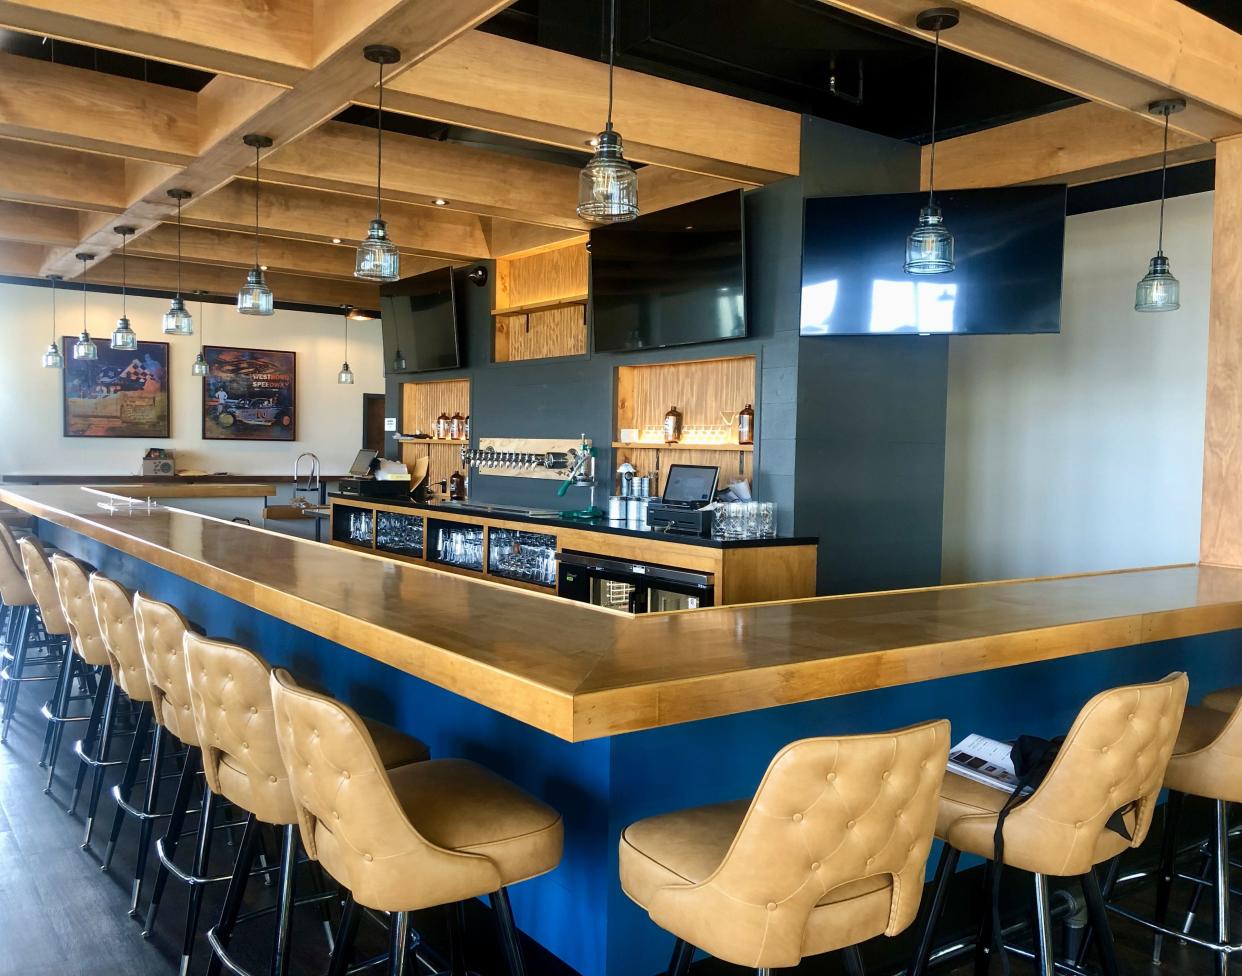 The bar at Cold Harbor Brewing's new Westborough restaurant and brewery is more than twice the size of the one at its old Milk Street taproom.